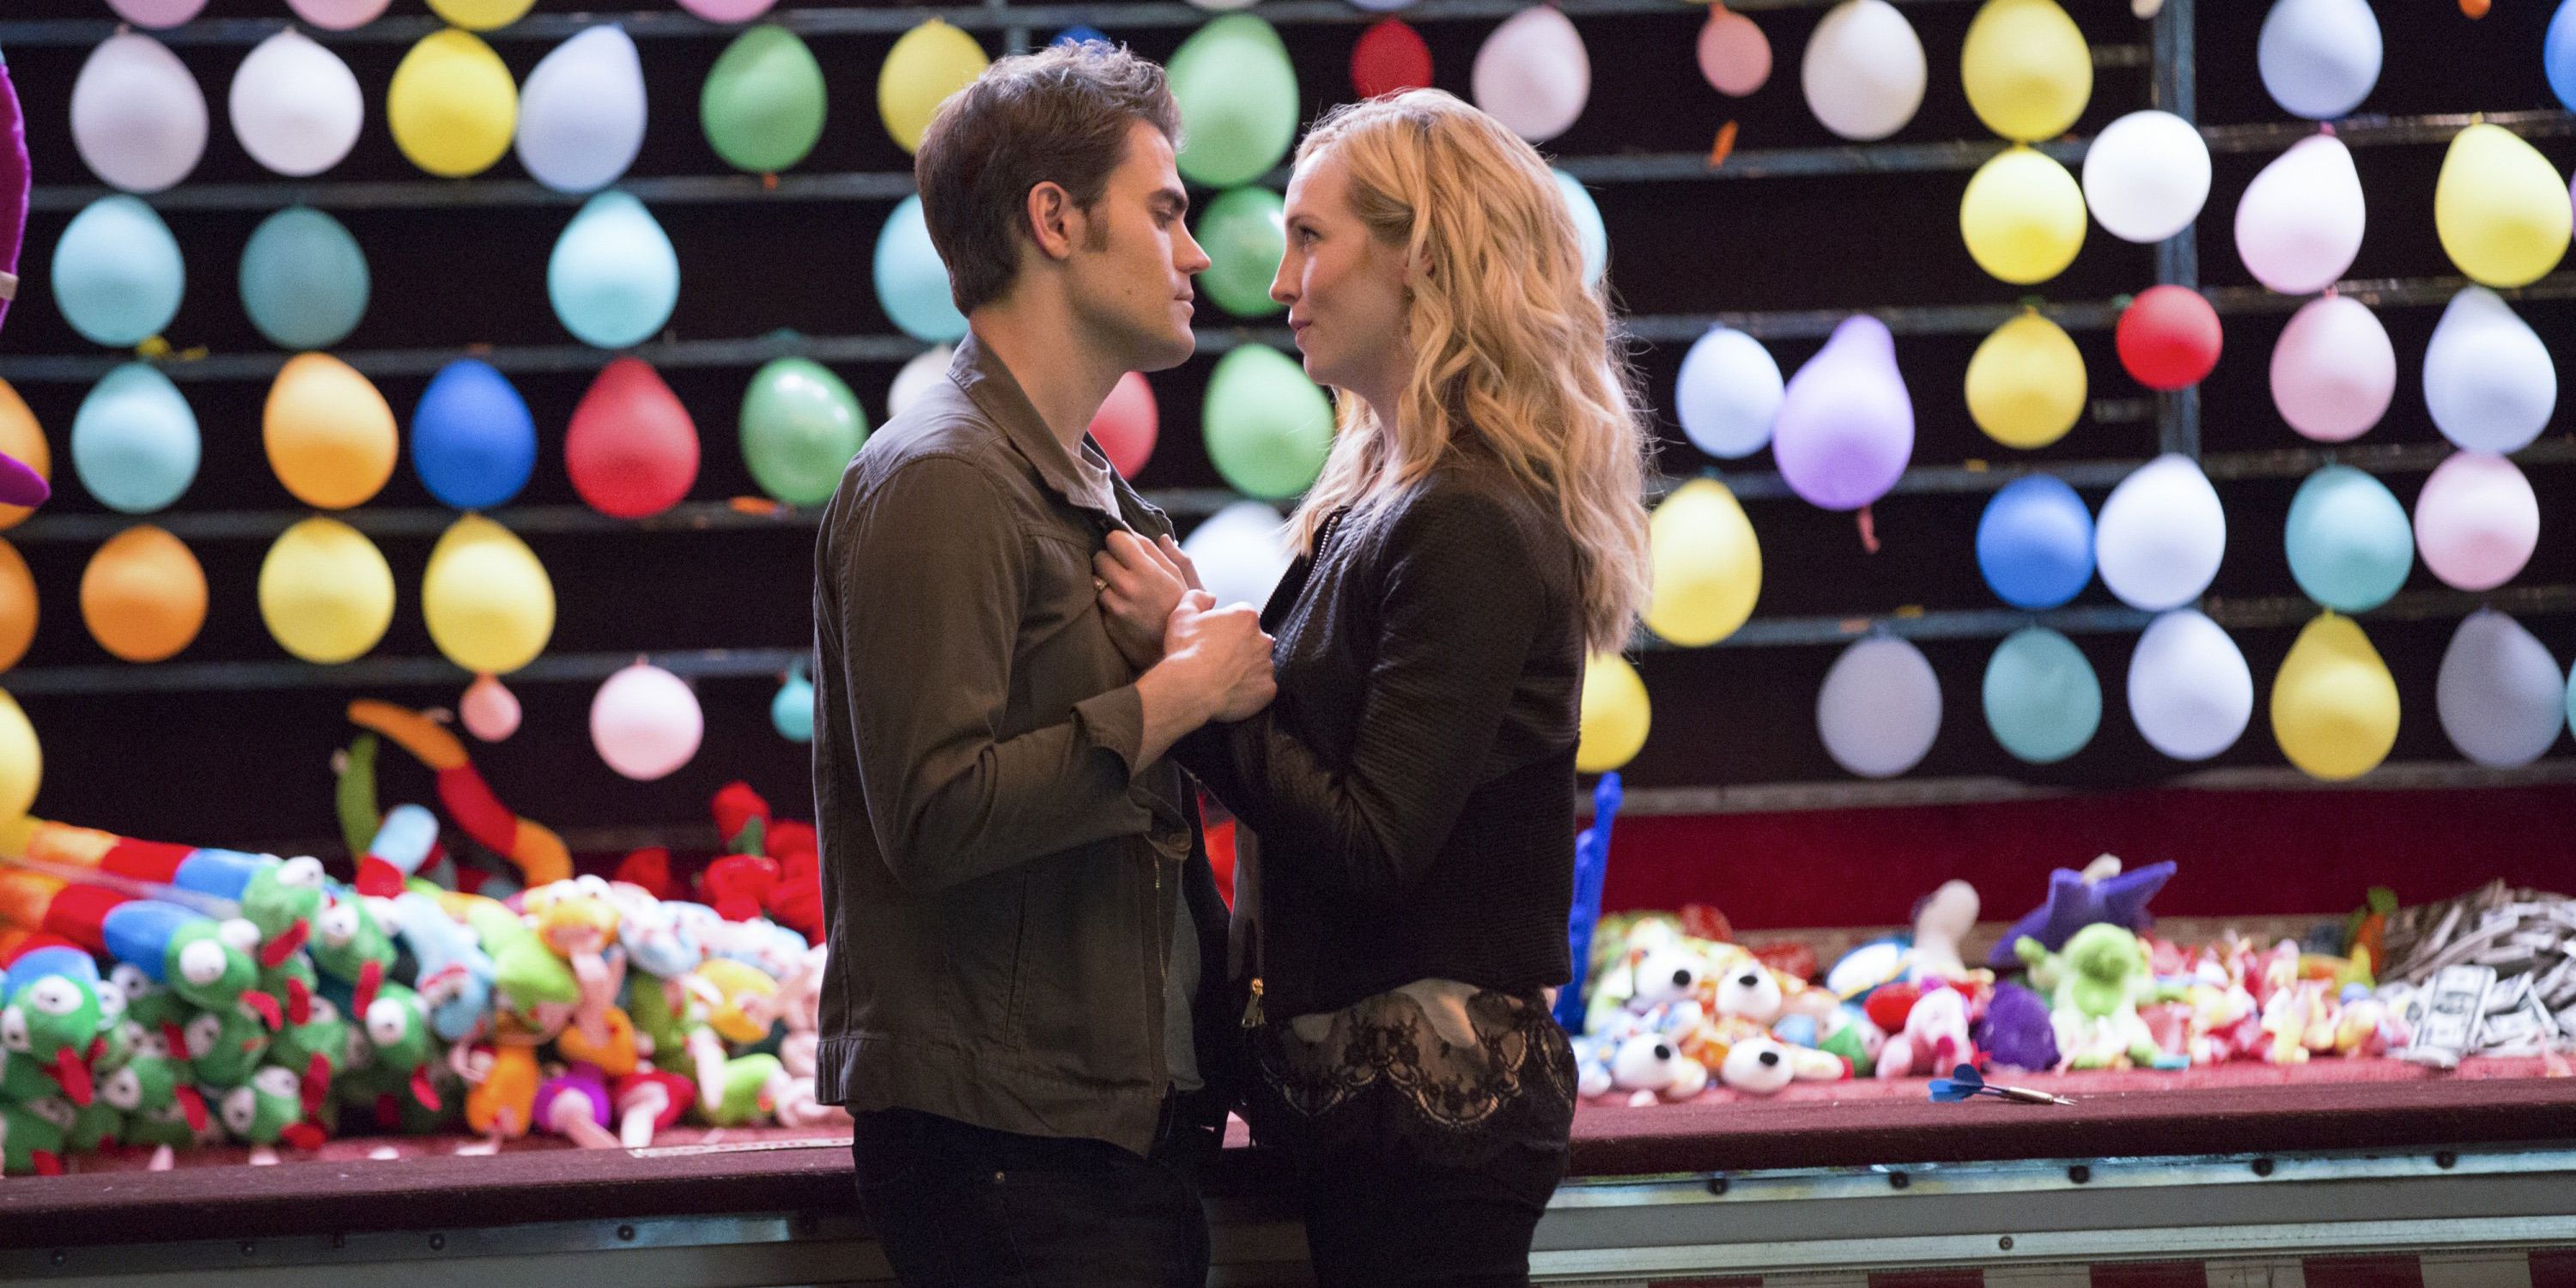 Stefan and Caroline at the carnival in The Vampire Diaries.